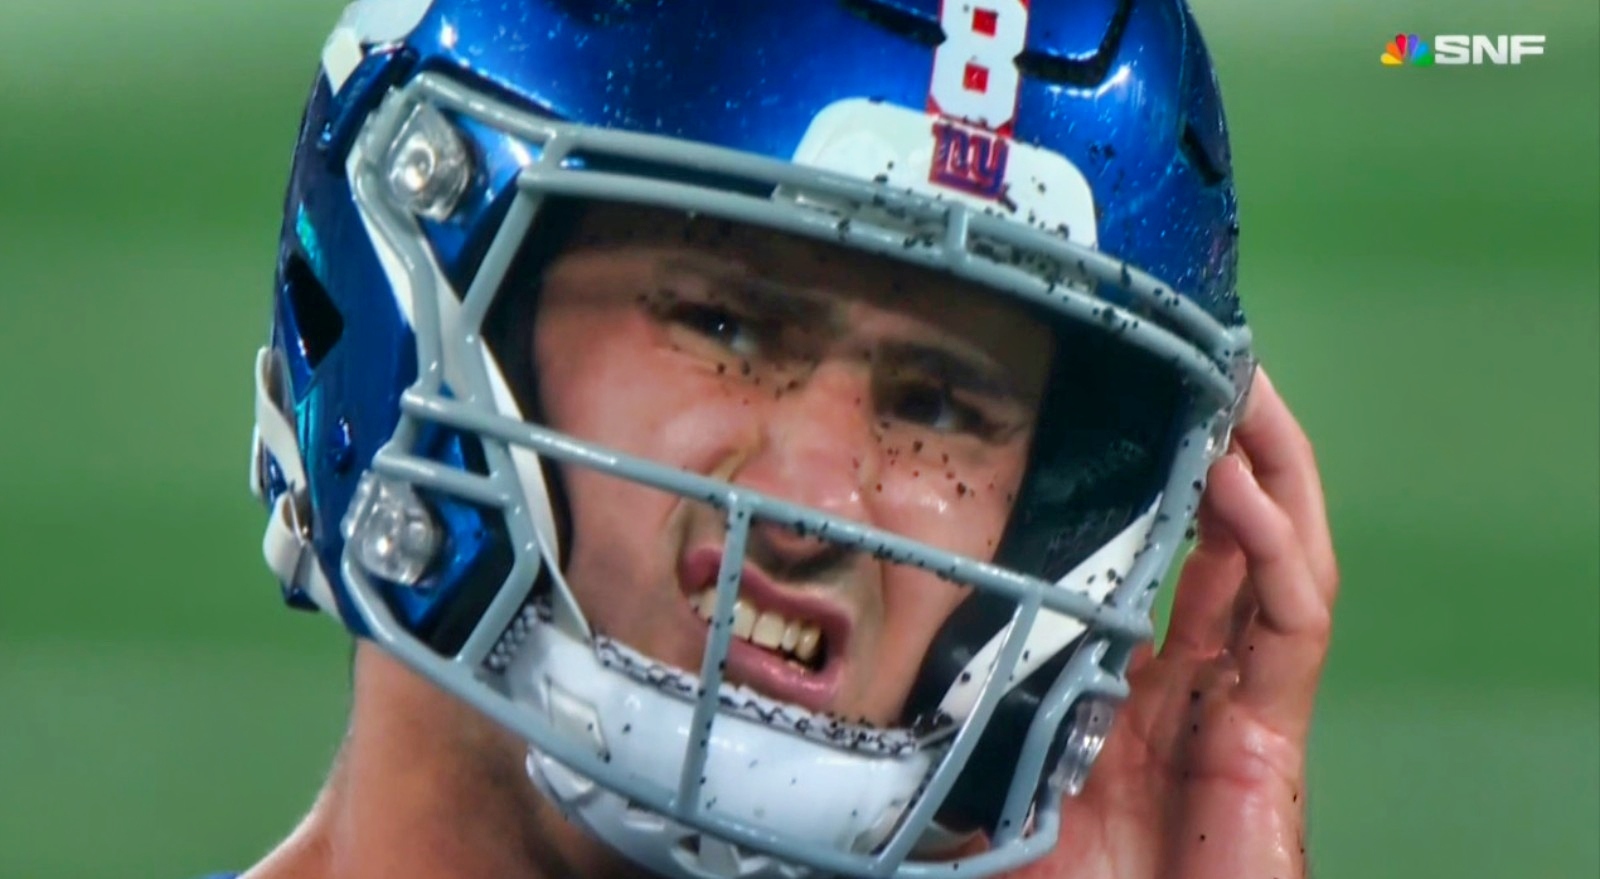 Social Media Is Torching The New York Giants During SNF